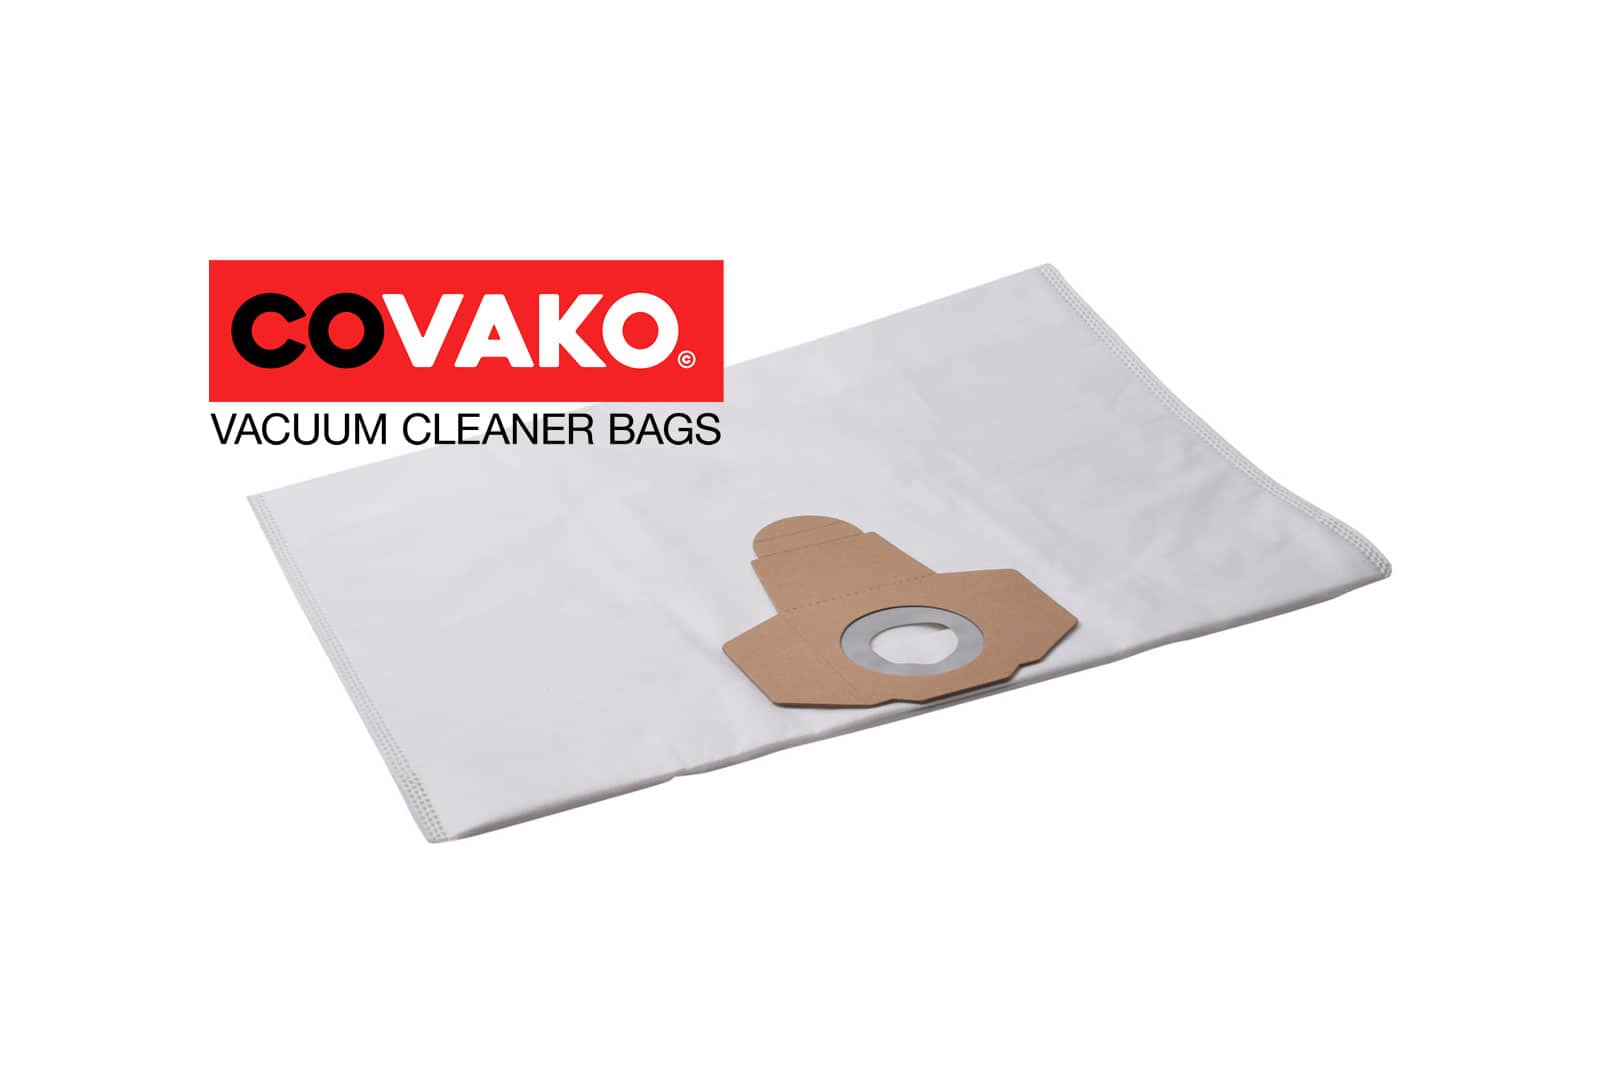 Einhell RT-VC 1420 / Synthesis - Einhell vacuum cleaner bags